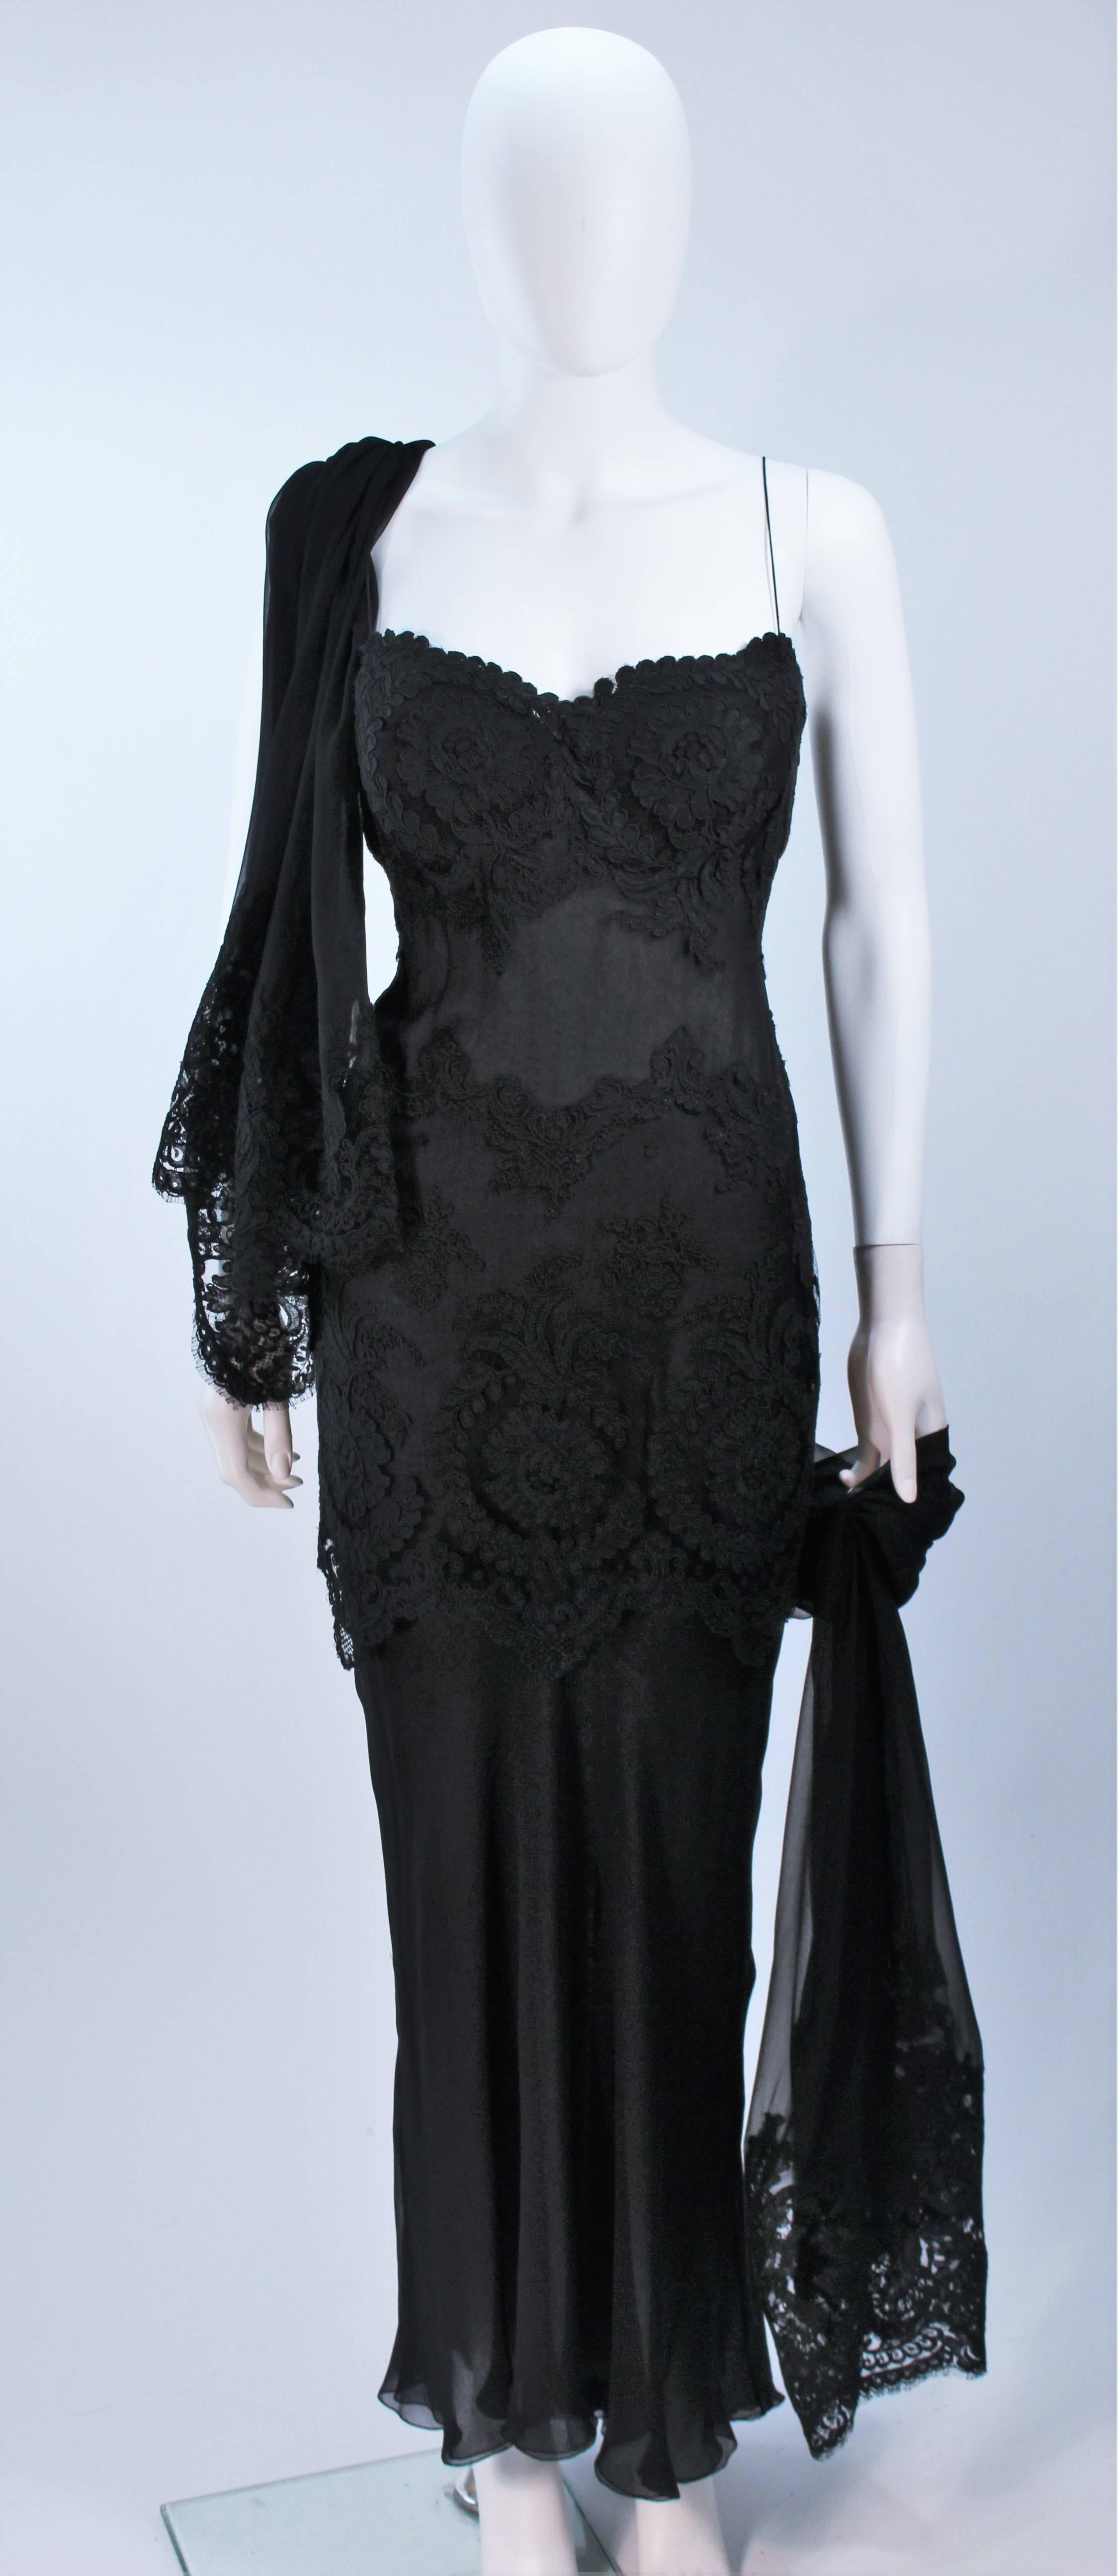 Women's GALANOS Black Sheer Silk Chiffon Gown with Lace Applique & Wrap Size 8-10